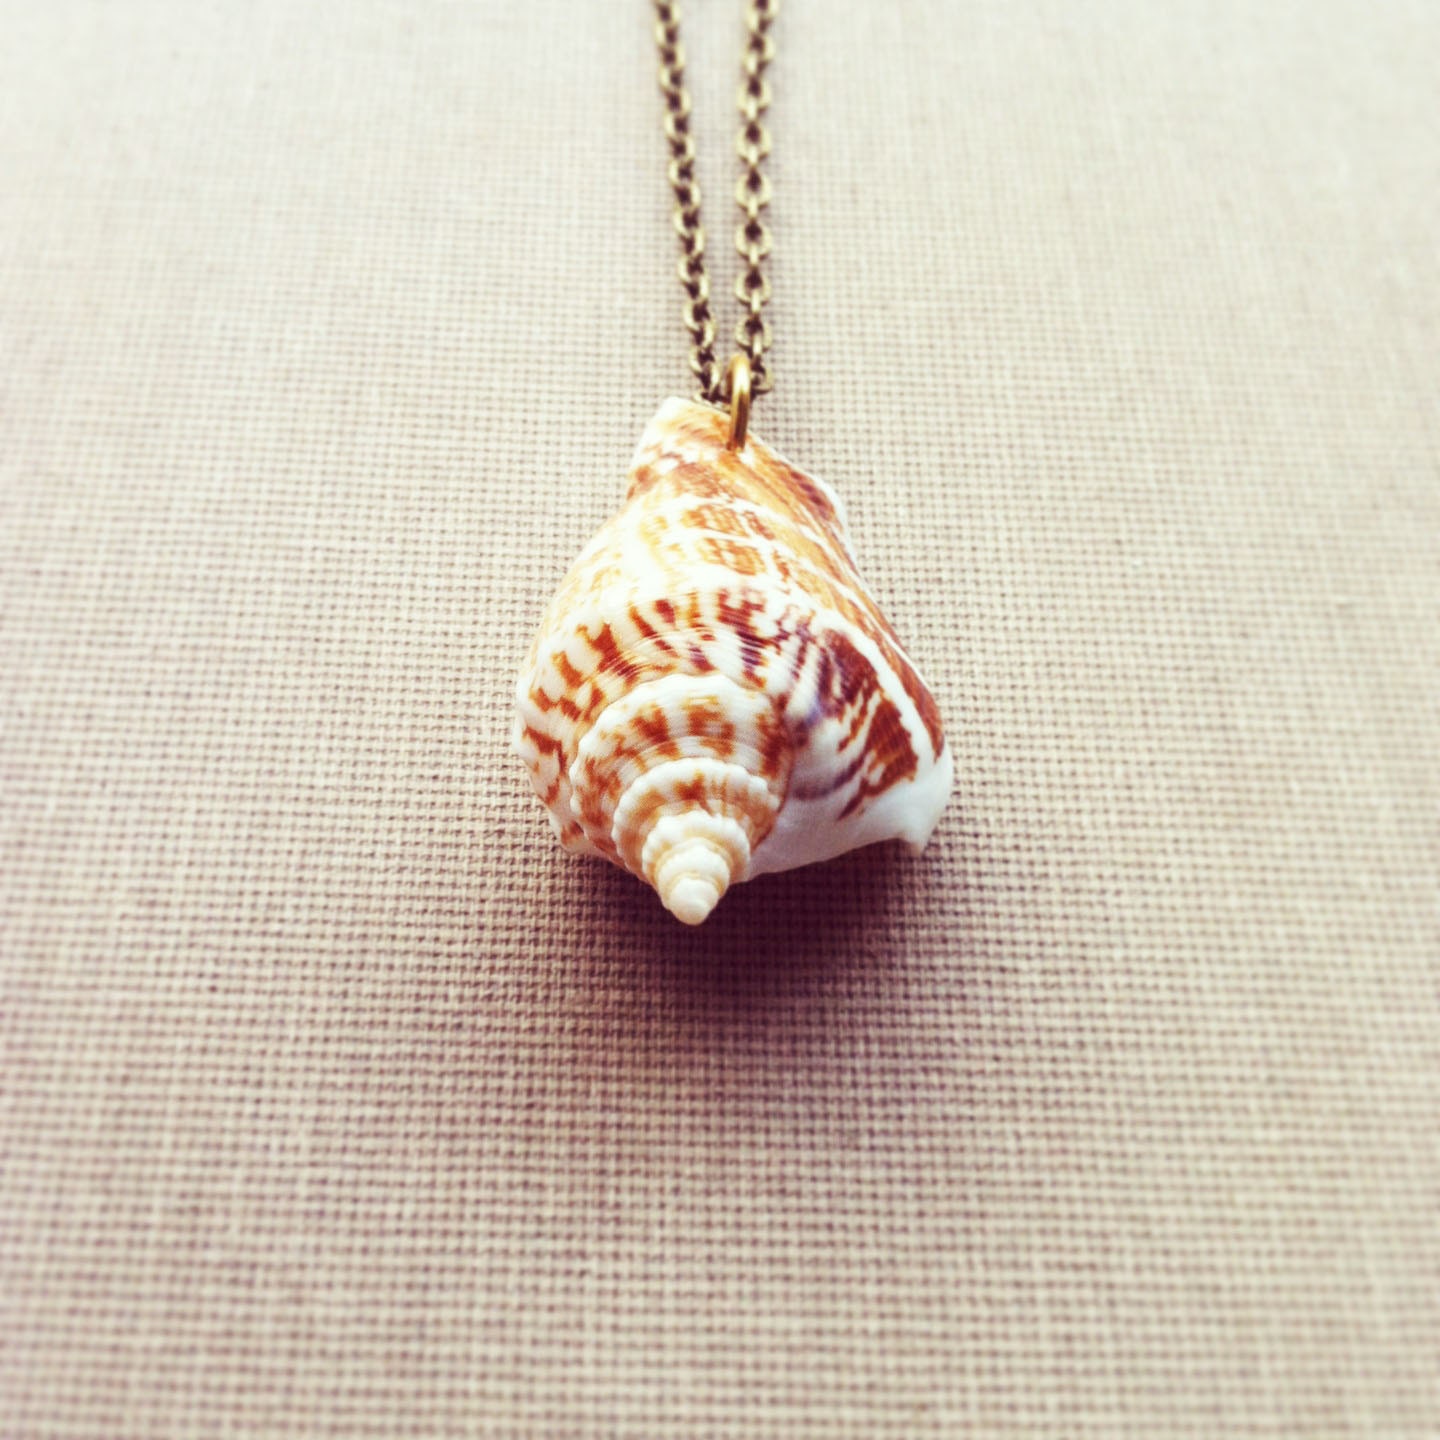 Seashell Necklace Real Shell Nautical Jewelry by lowelowejewelry